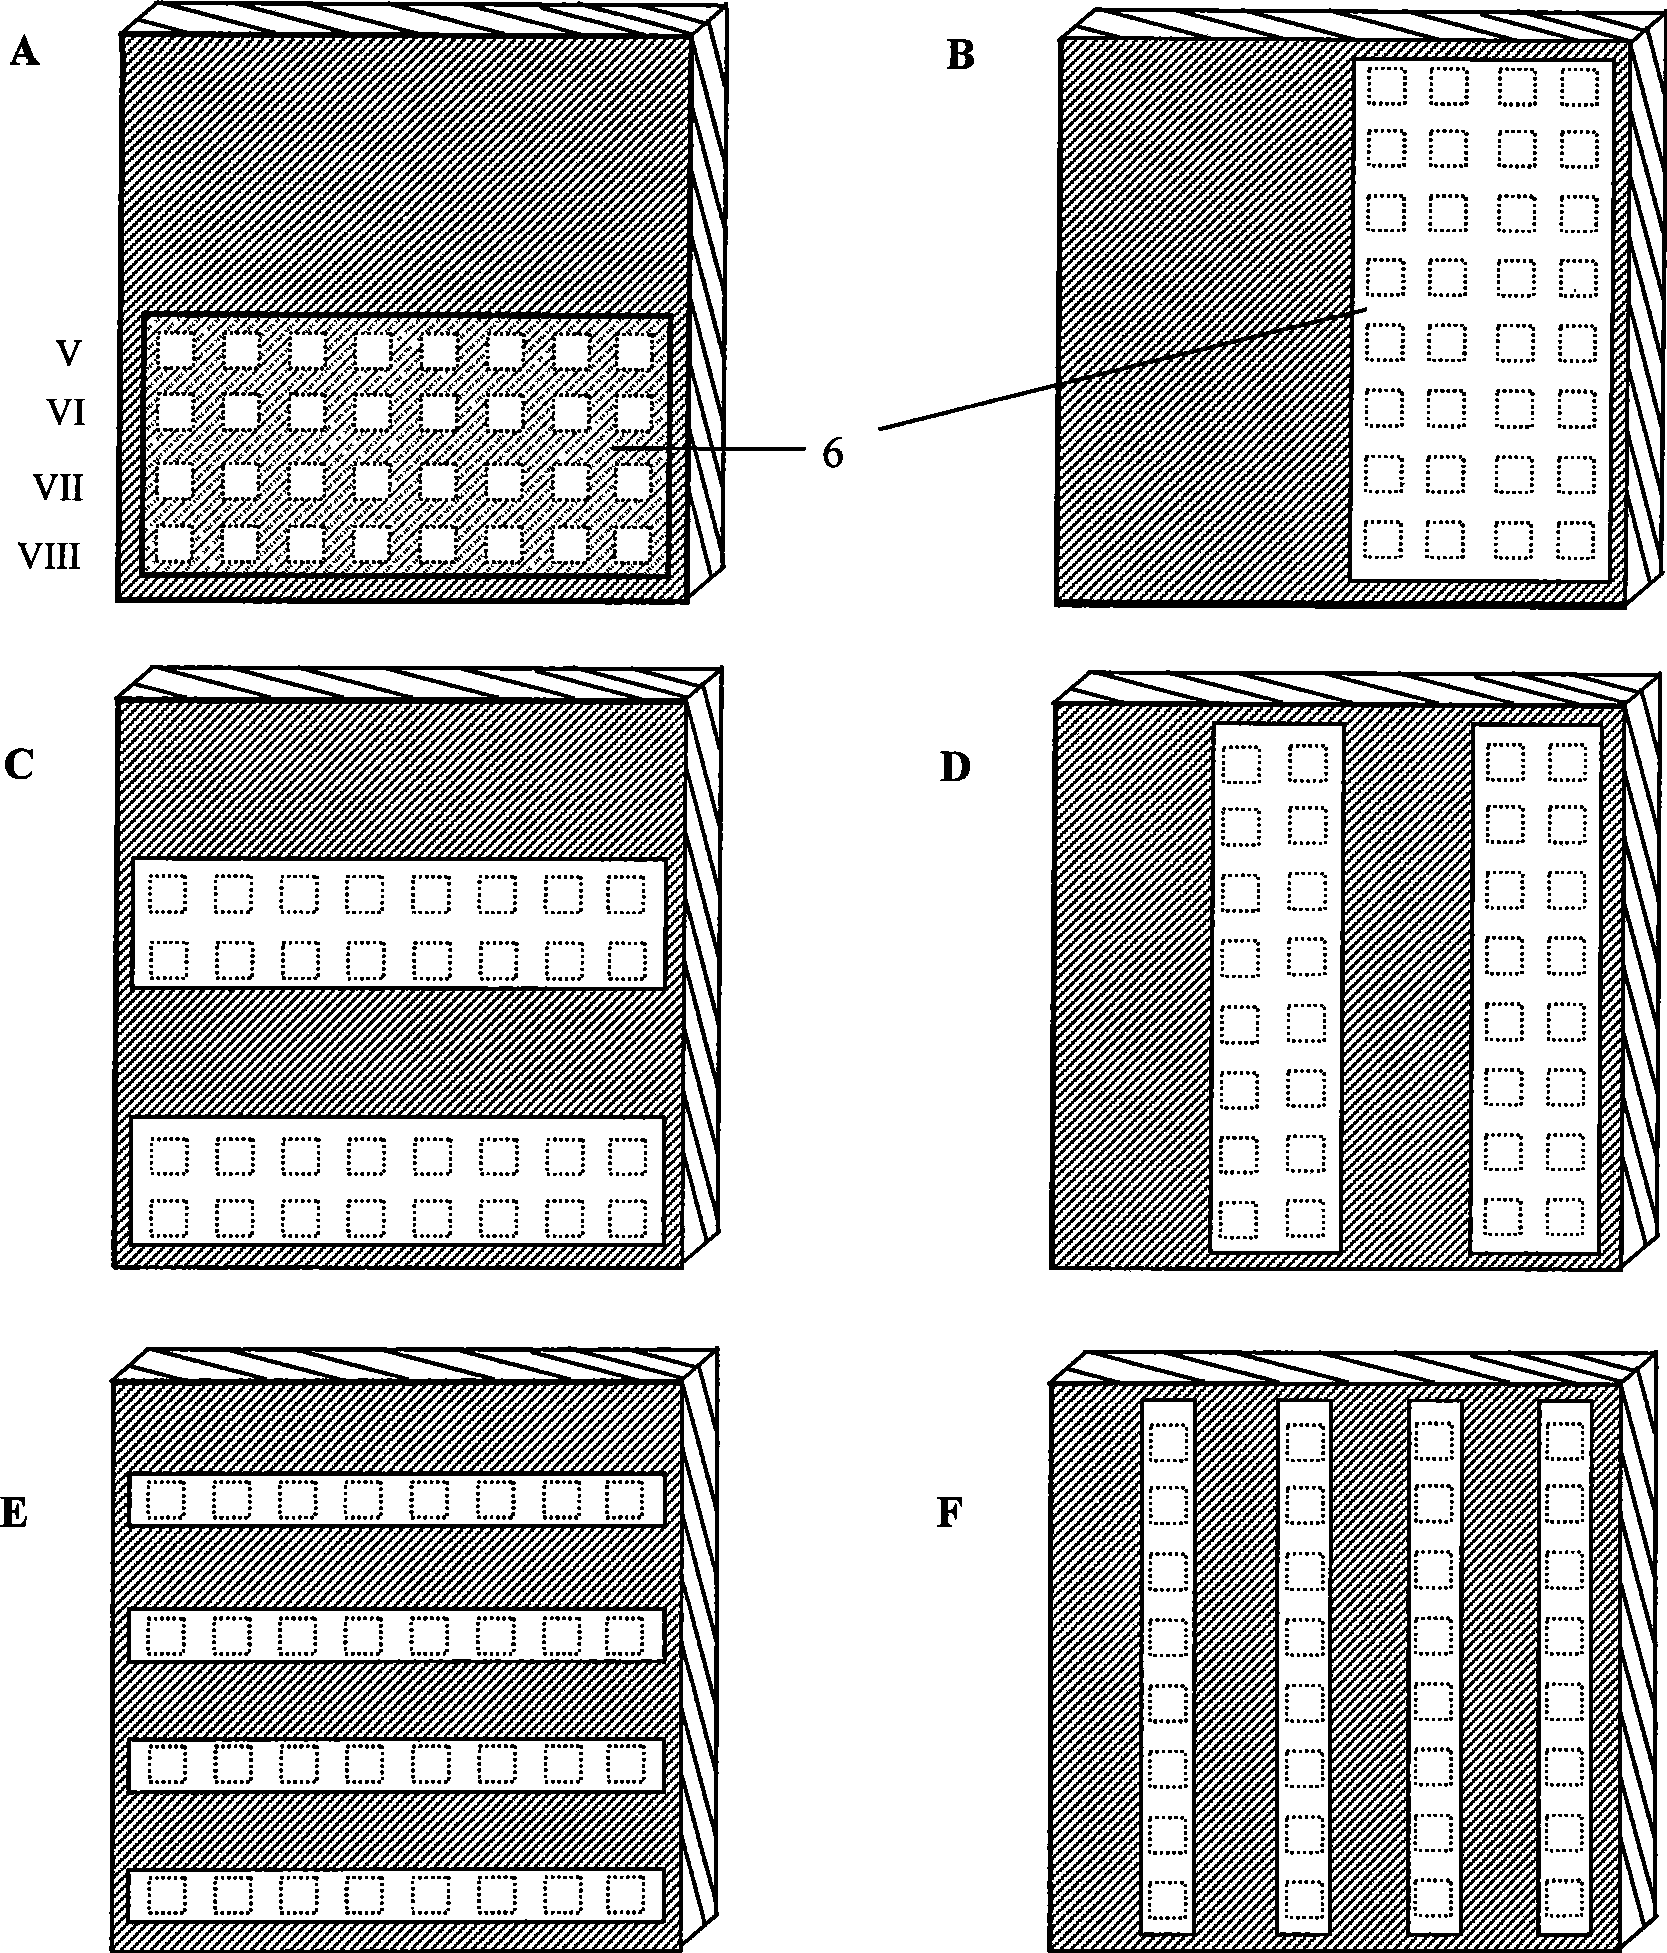 Method for preparing high performance mercury cadmium telluride p-n junction by ion injection